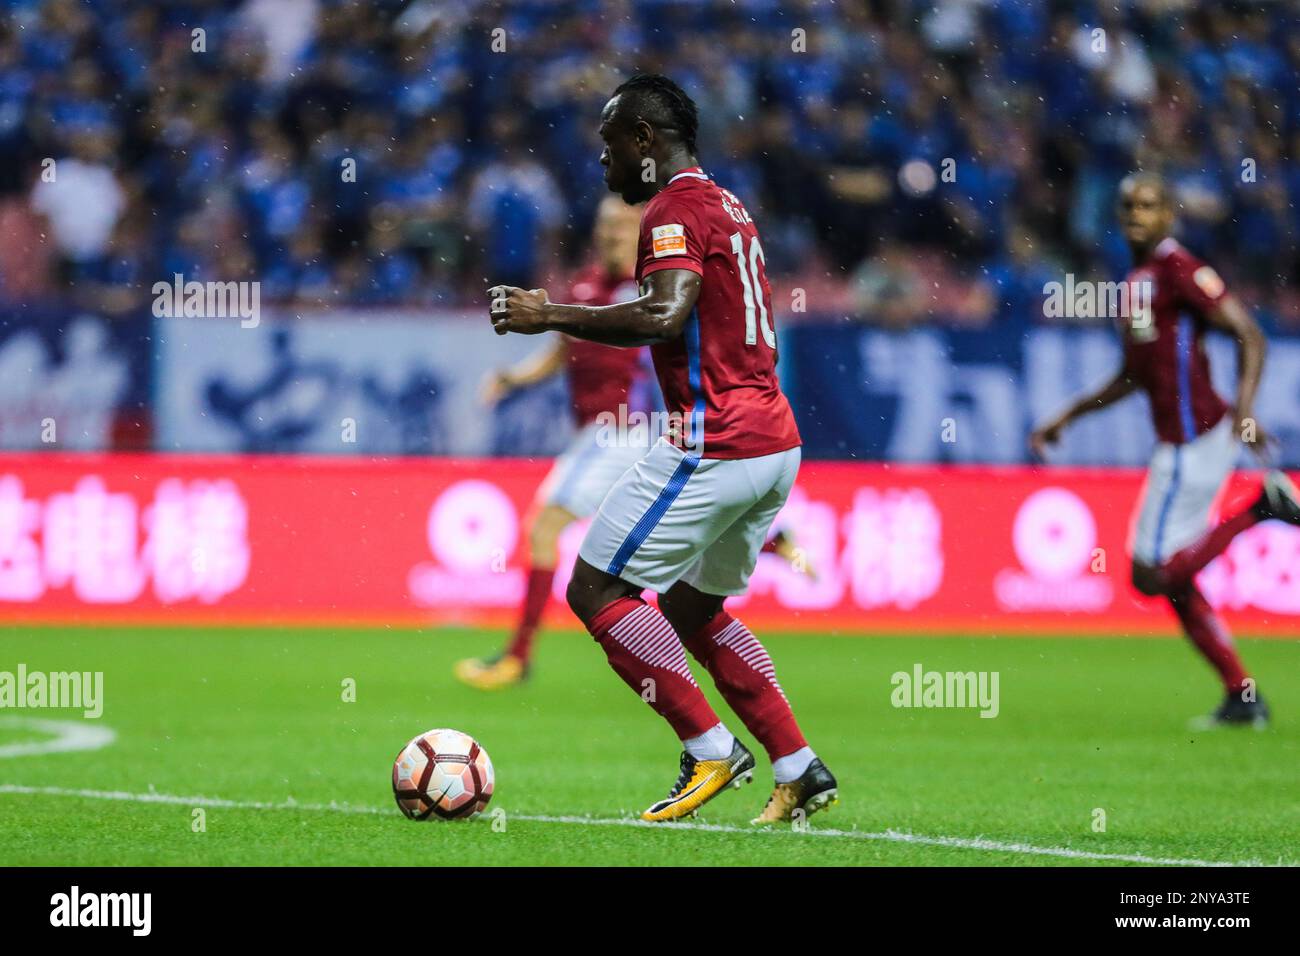 Cameroonian football player Christian Bassogog of Henan Jianye dribbles the ball against Shanghai Greenland Shenhua in their 24th round match during the 2017 Chinese Football Association Super League (CSL) in Shanghai, China, 10 September 2017.(Imaginechina via AP Images) Stock Photo